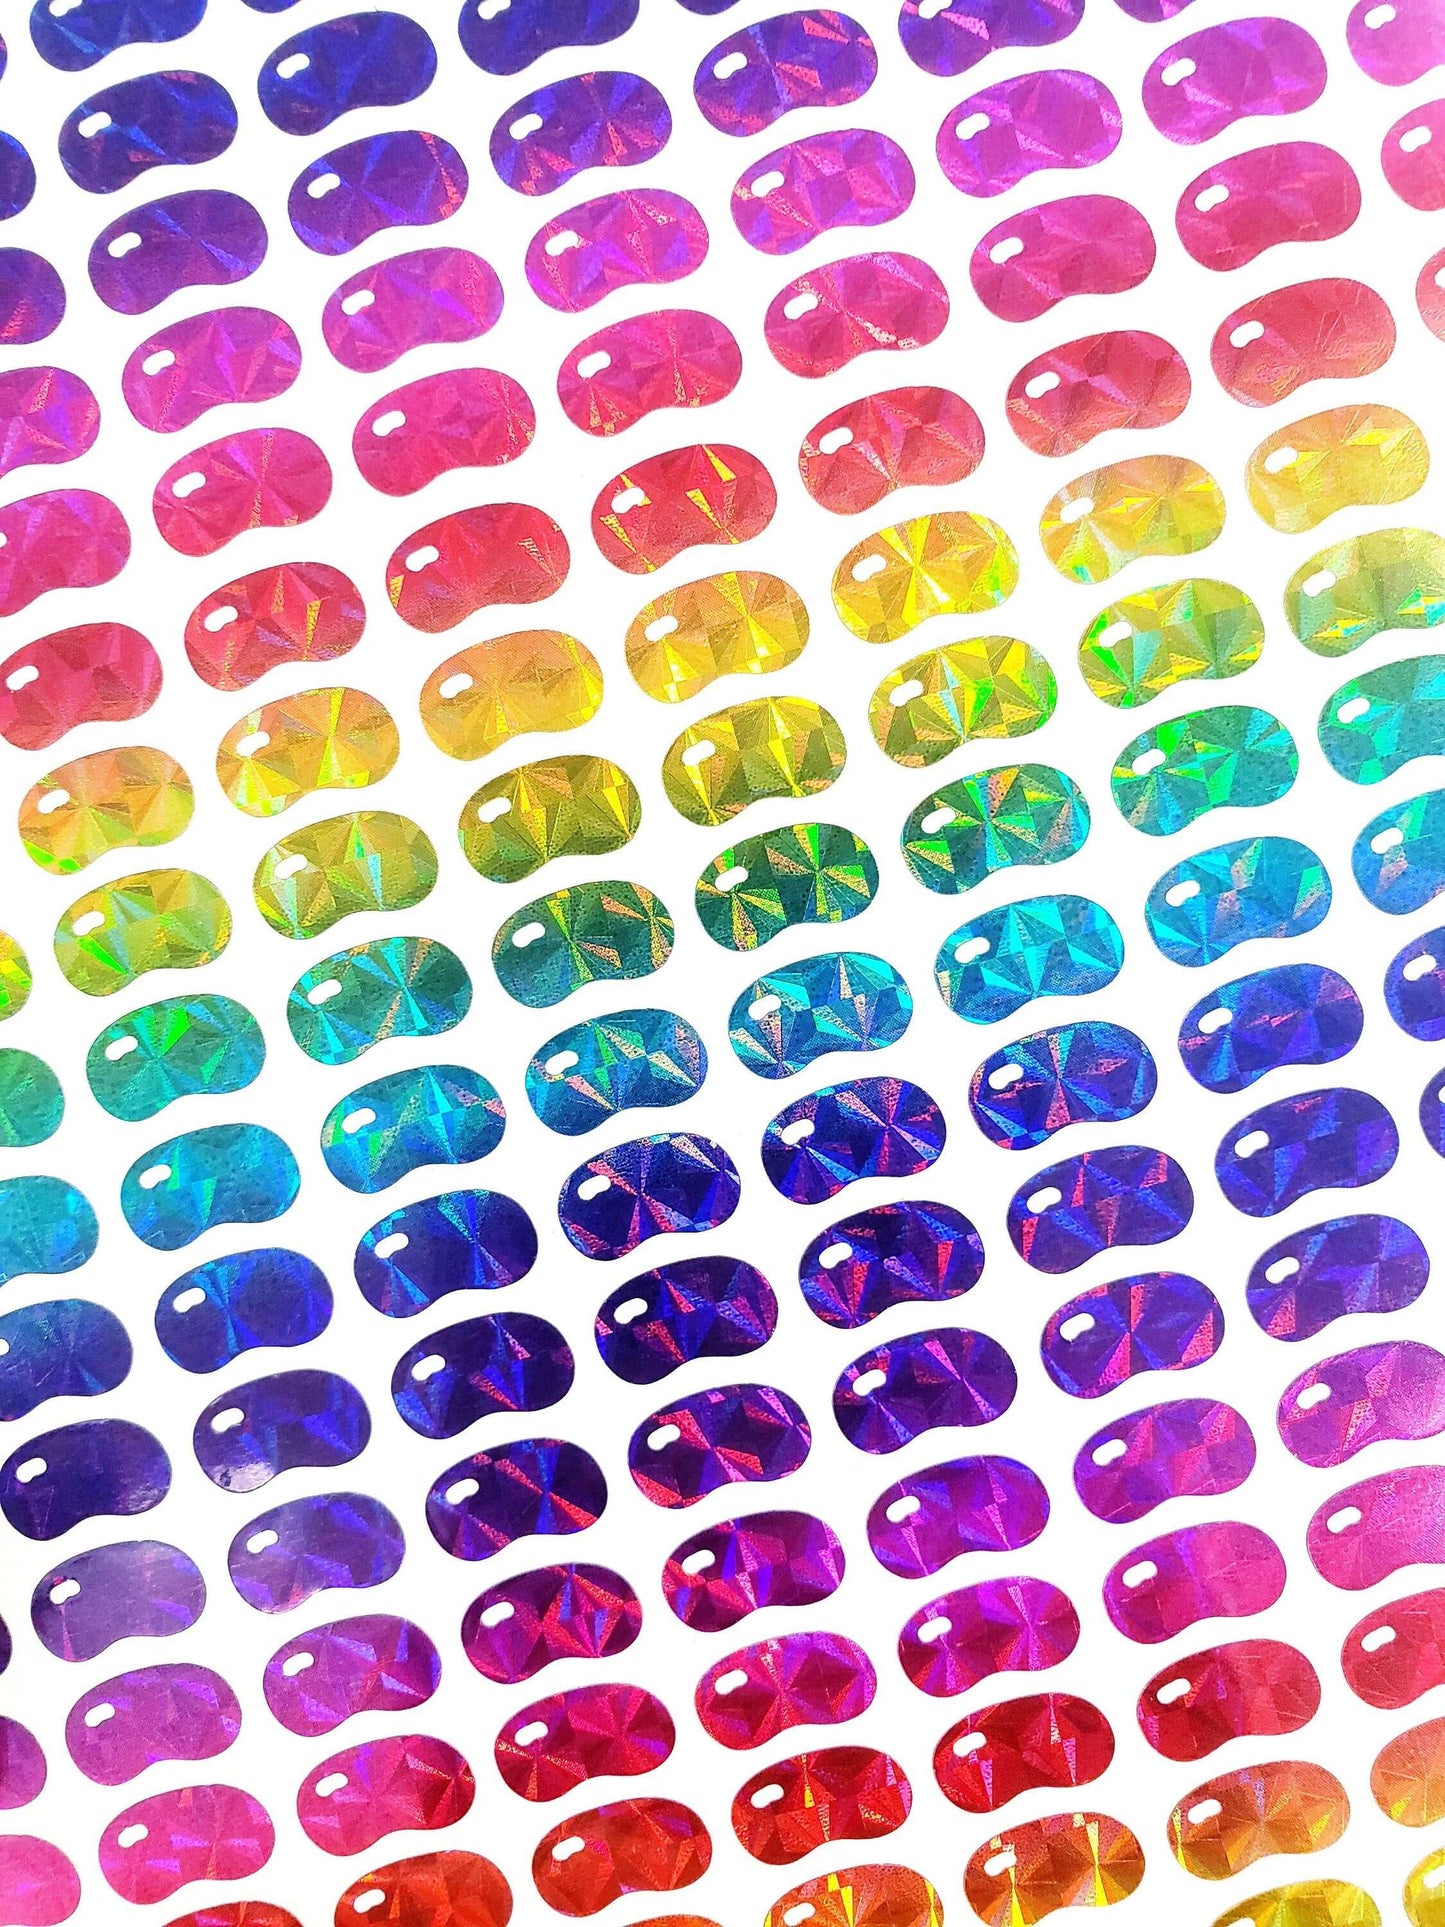 Jellybean Stickers, set of 100 or 200 rainbow jellybean candy decals for containers, cards, notebooks, decorations and Easter craft projects